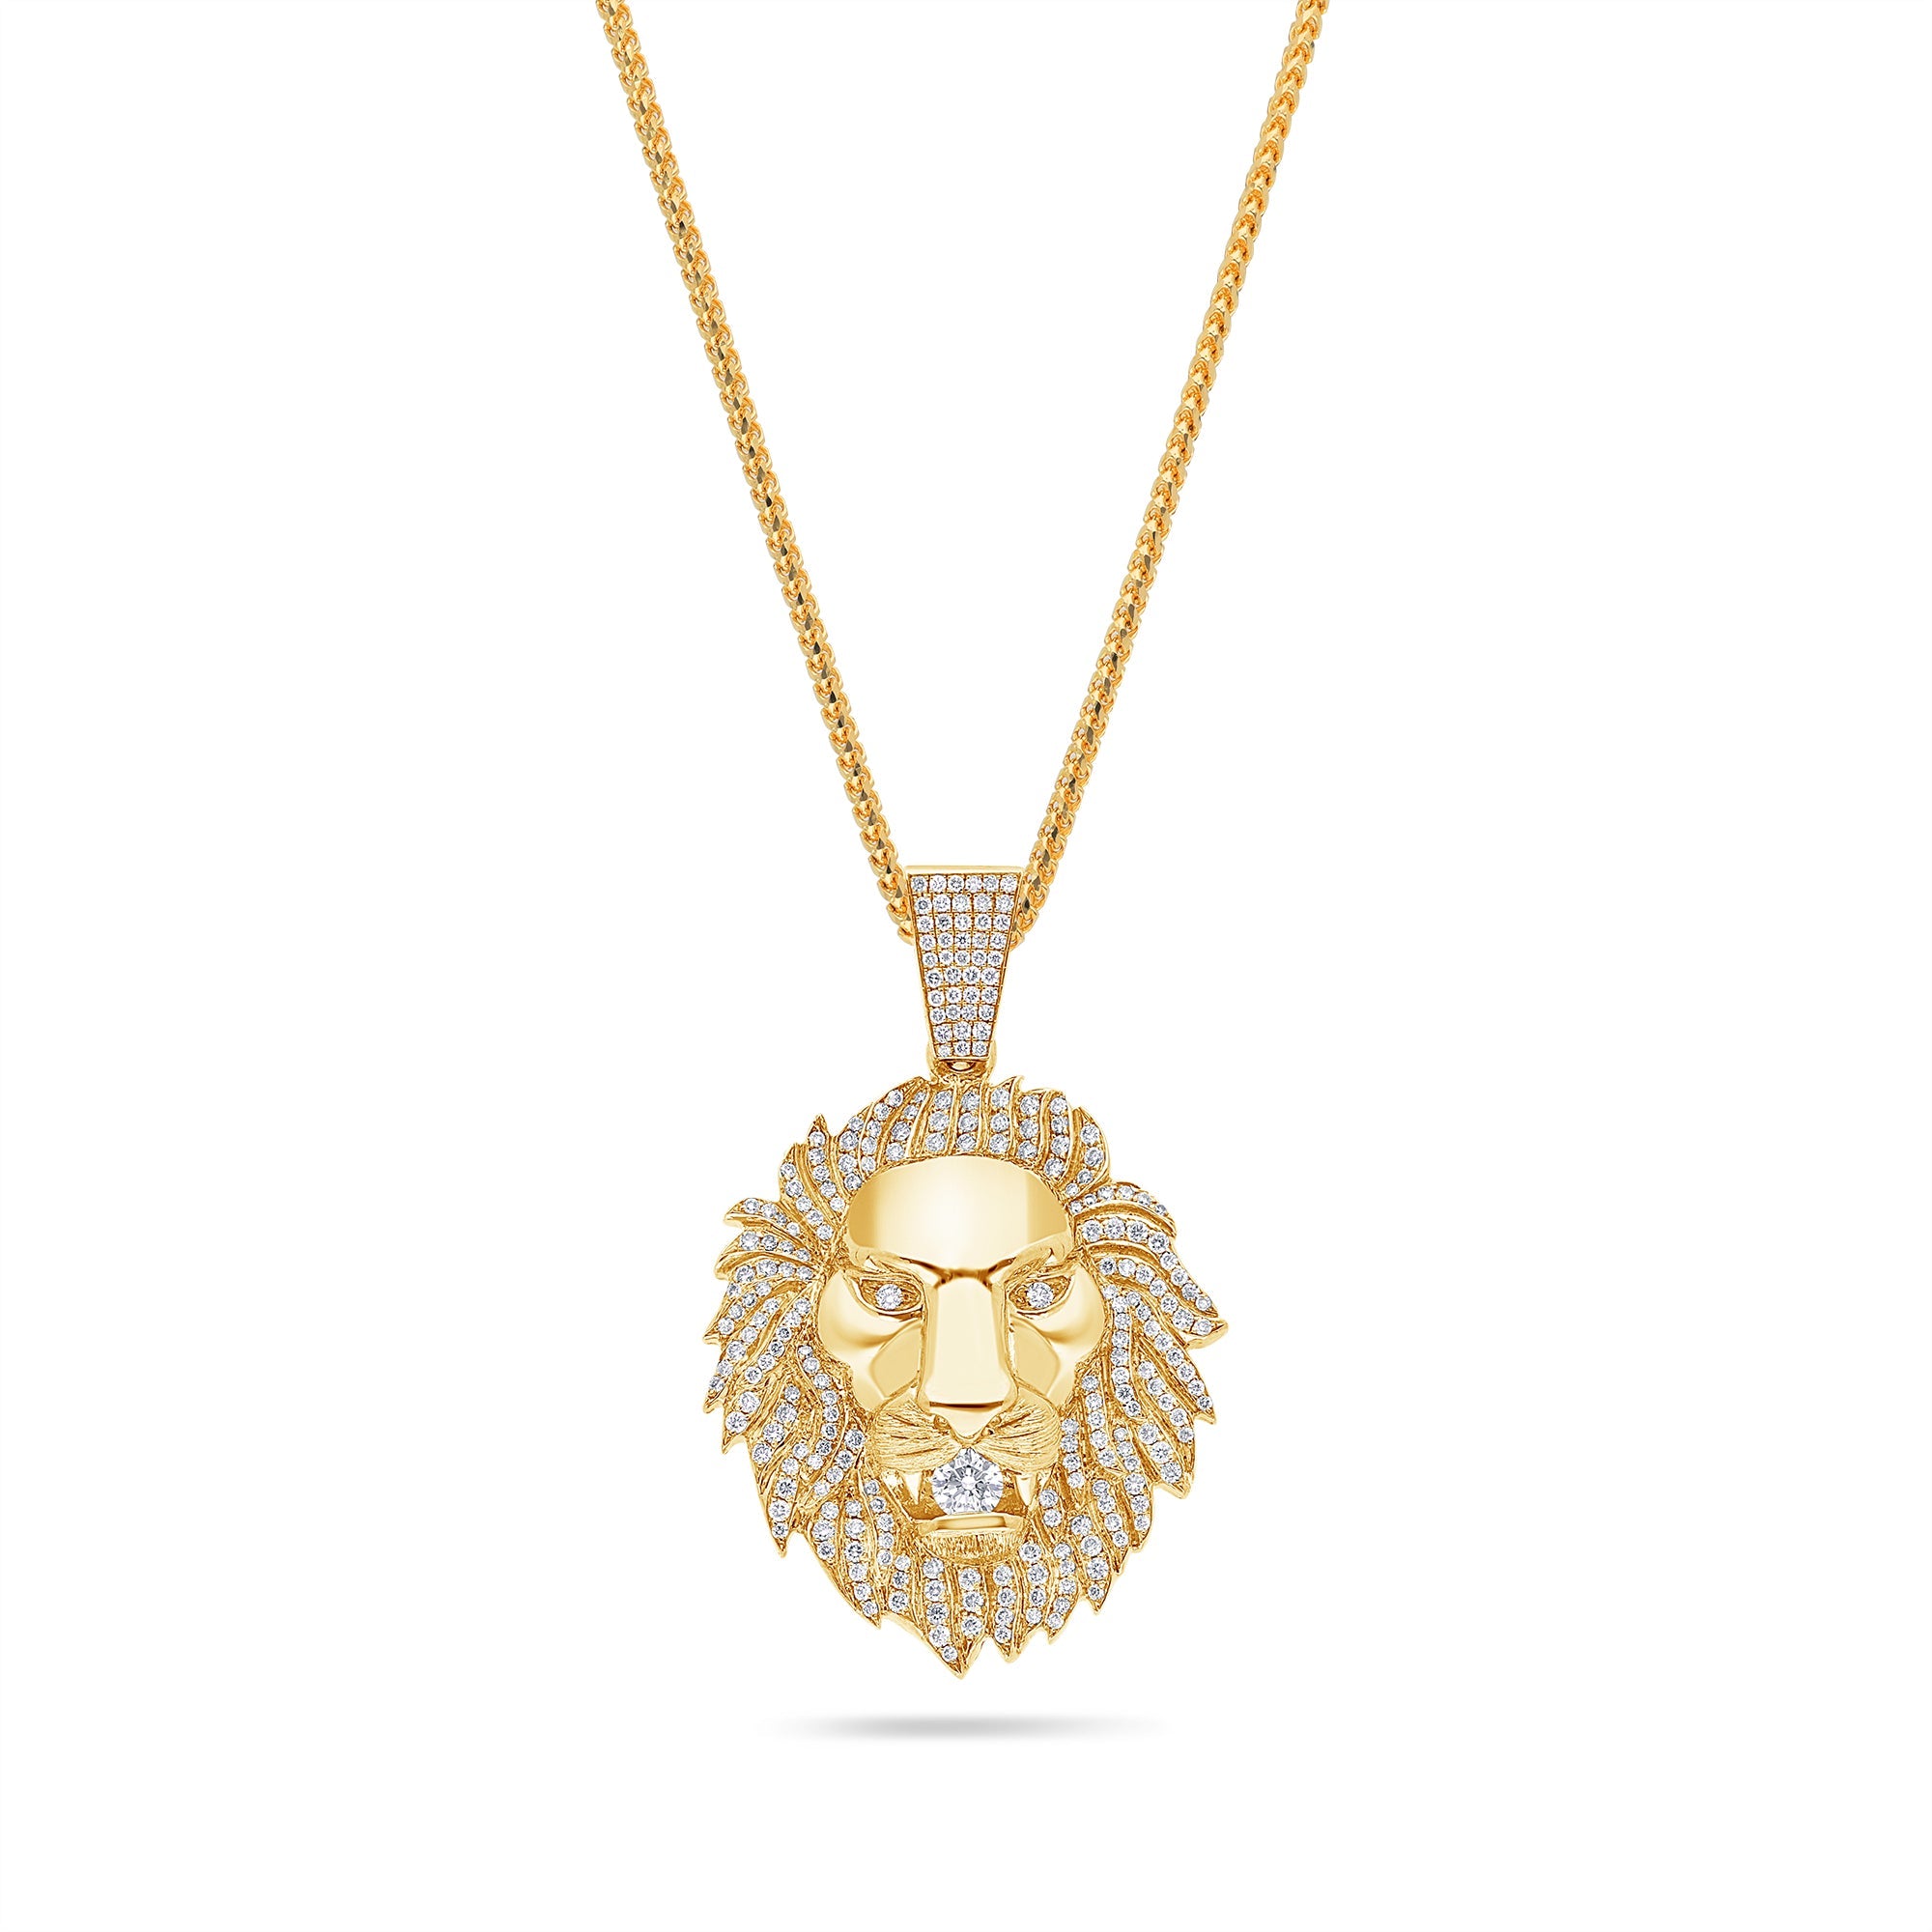 Milli Lion Piece (Fully Iced) (14K YELLOW GOLD) - IF & Co. Custom Jewelers